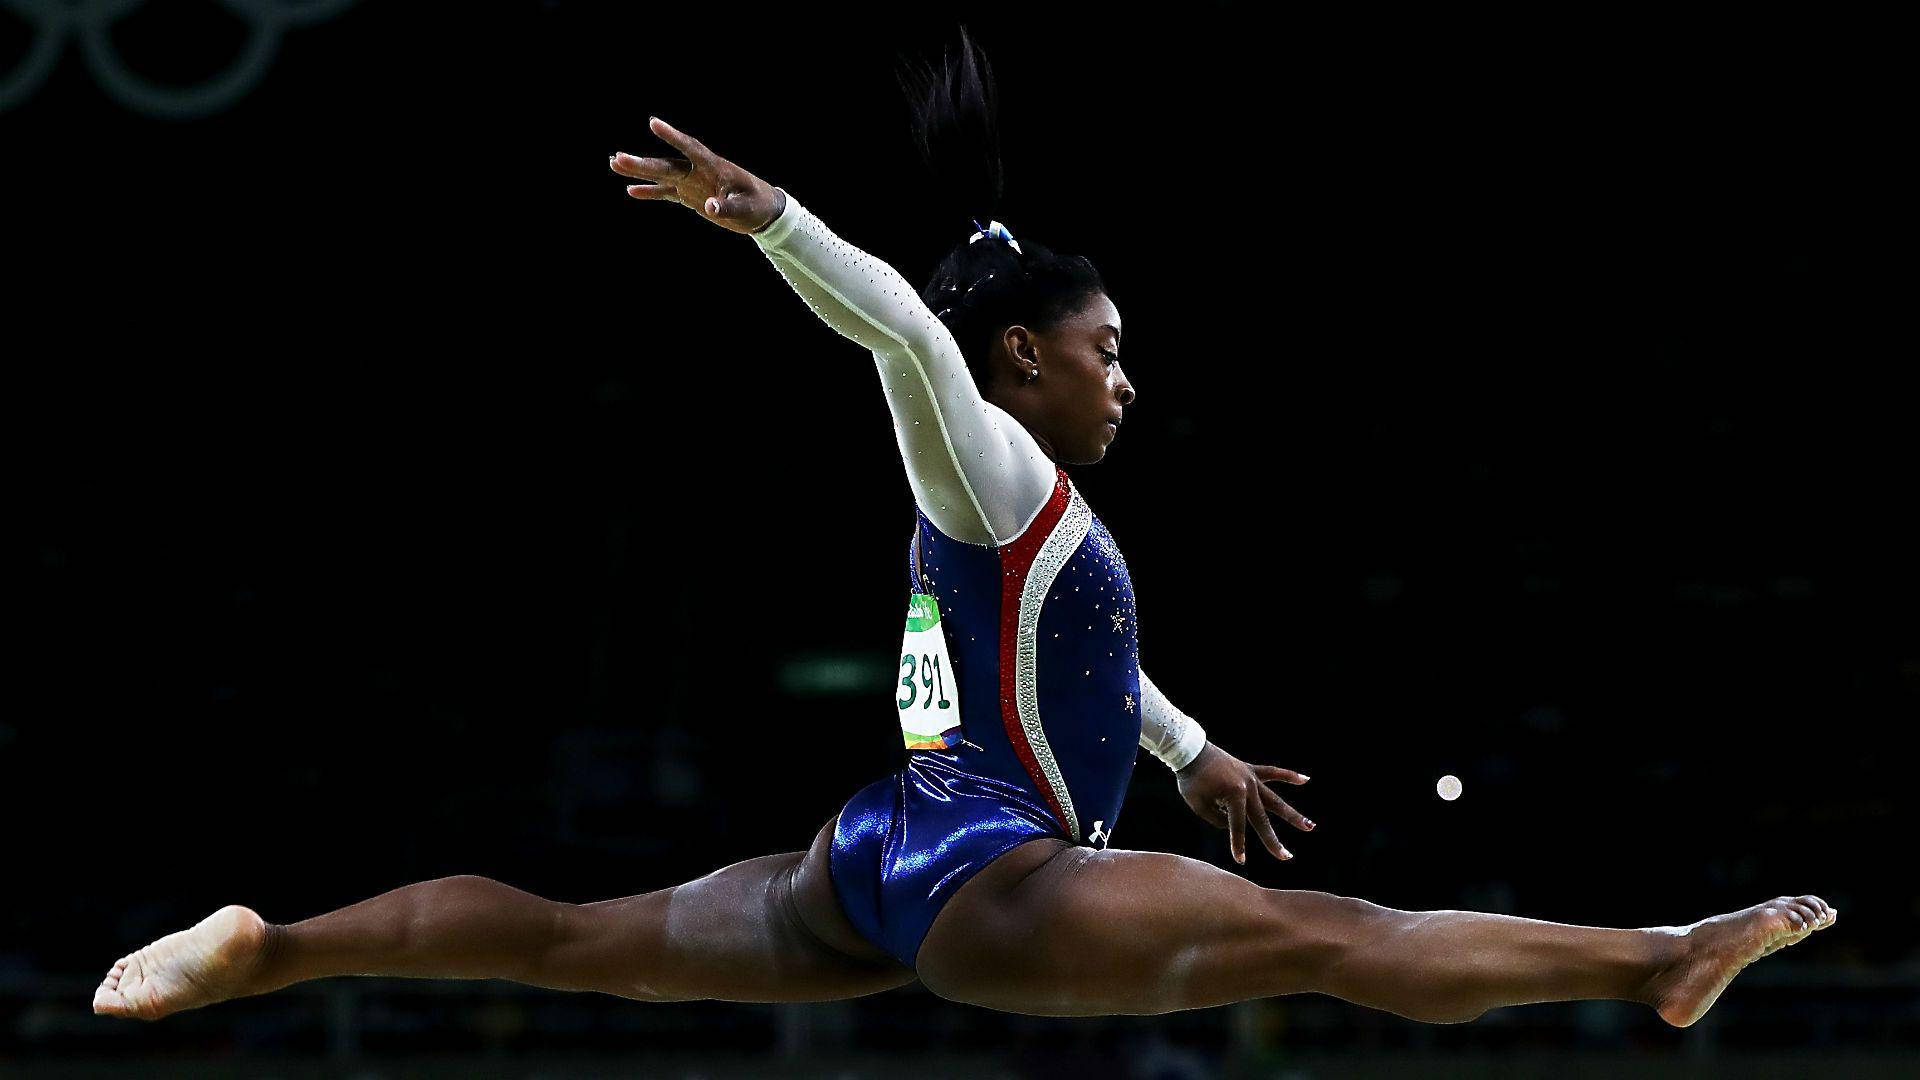 4-time Olympic Gold Medalist Simone Biles Performs On The Balance Beam Background